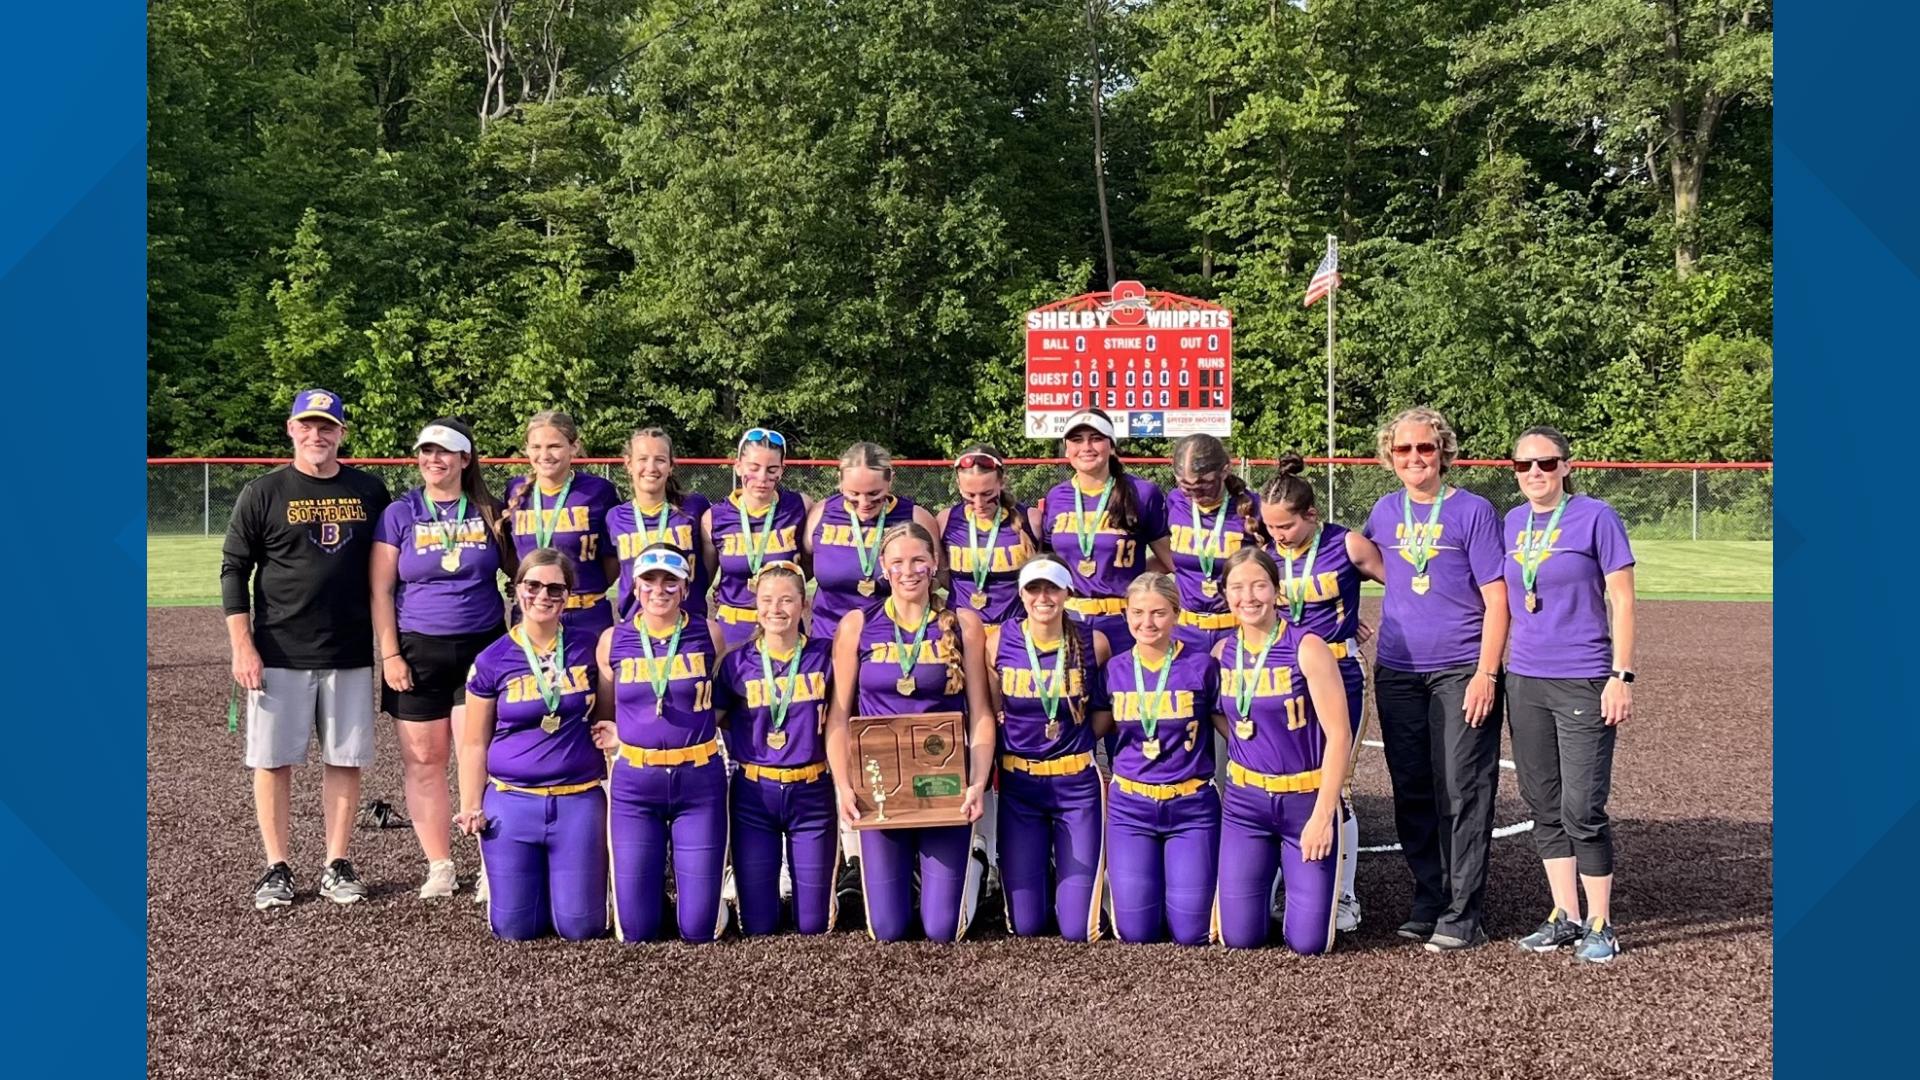 The Golden Bears are making school history this weekend in Akron as the softball program competes in its first-ever state tournament.